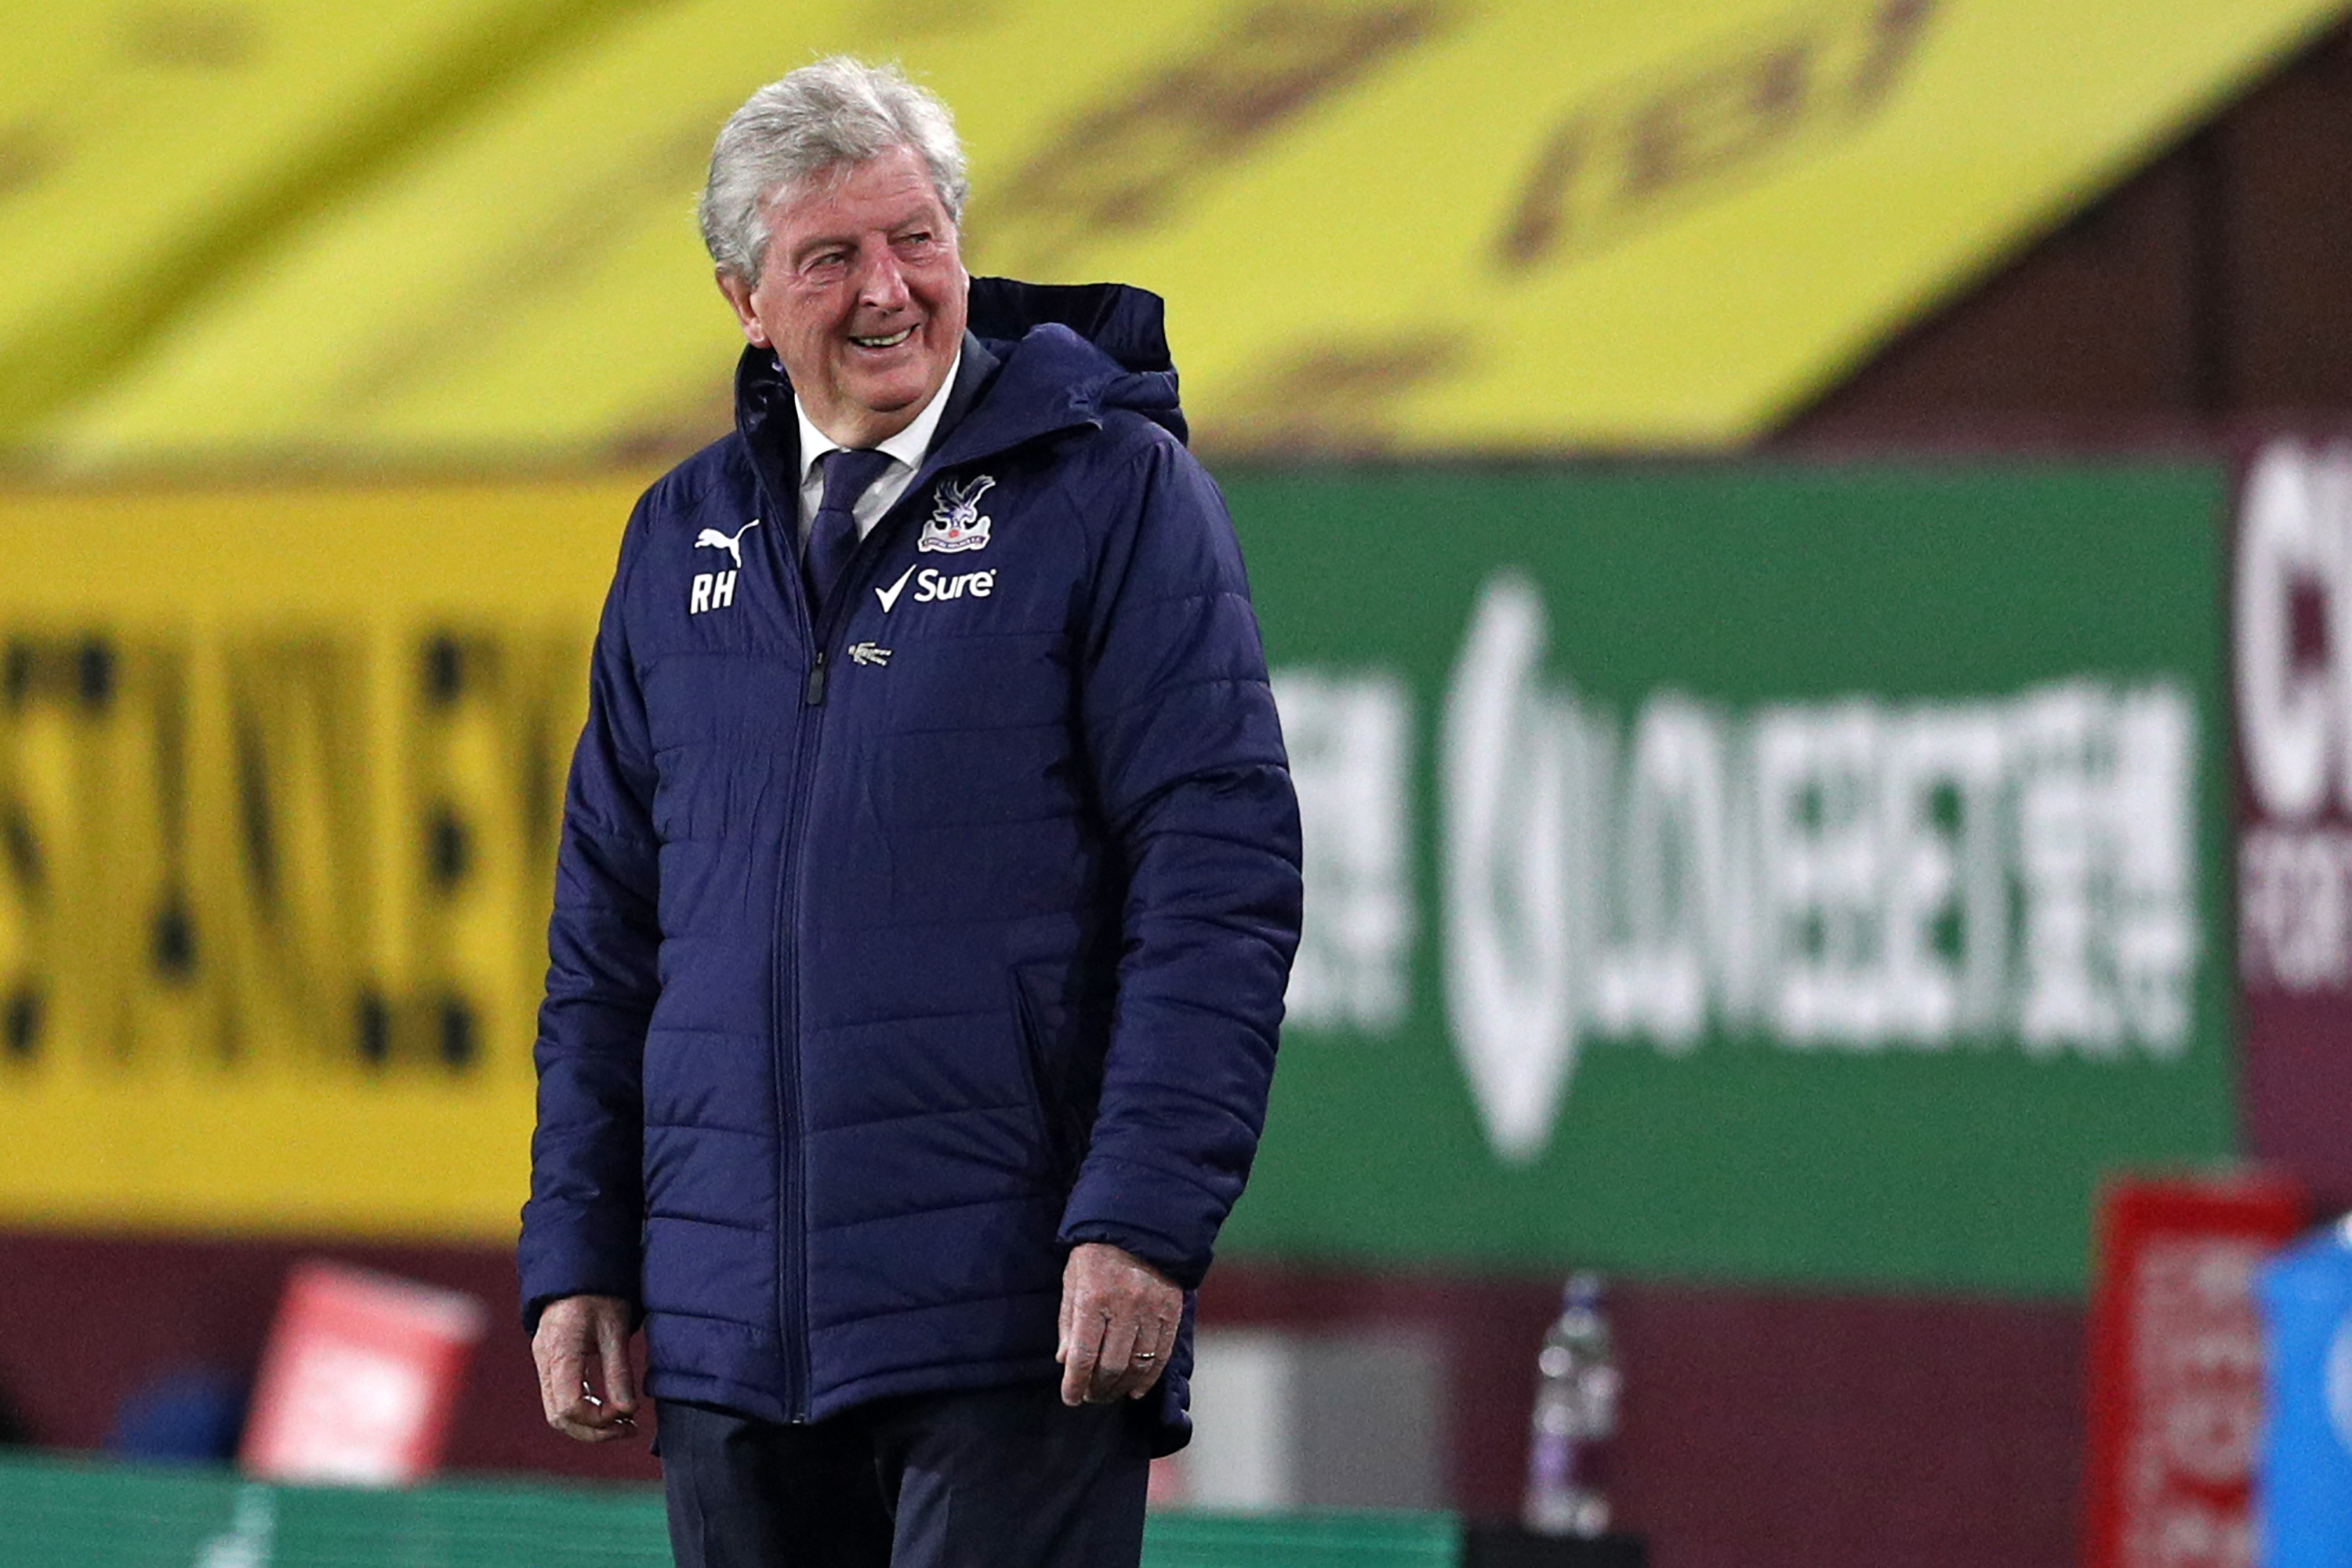 Roy Hodgson reflects on management in the Covid-19 era - CNN Video